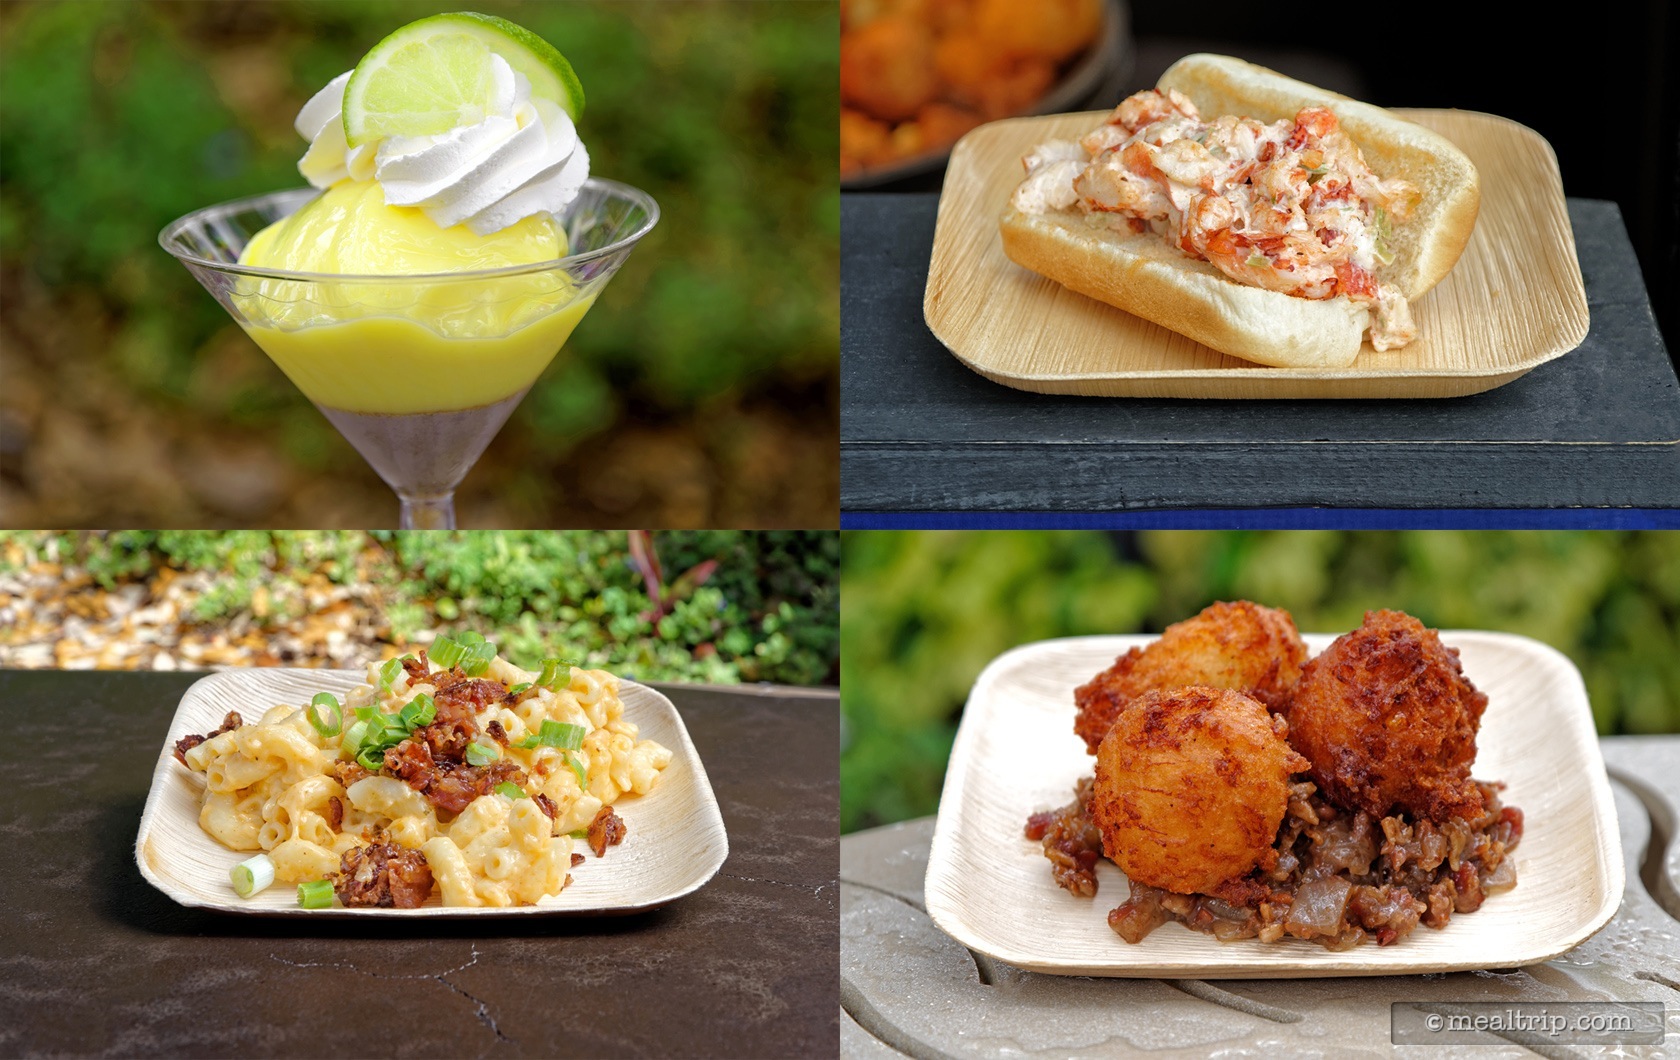 Menu Items & Booth Names for the 2019 Seven Seas Food Festival (Text List)